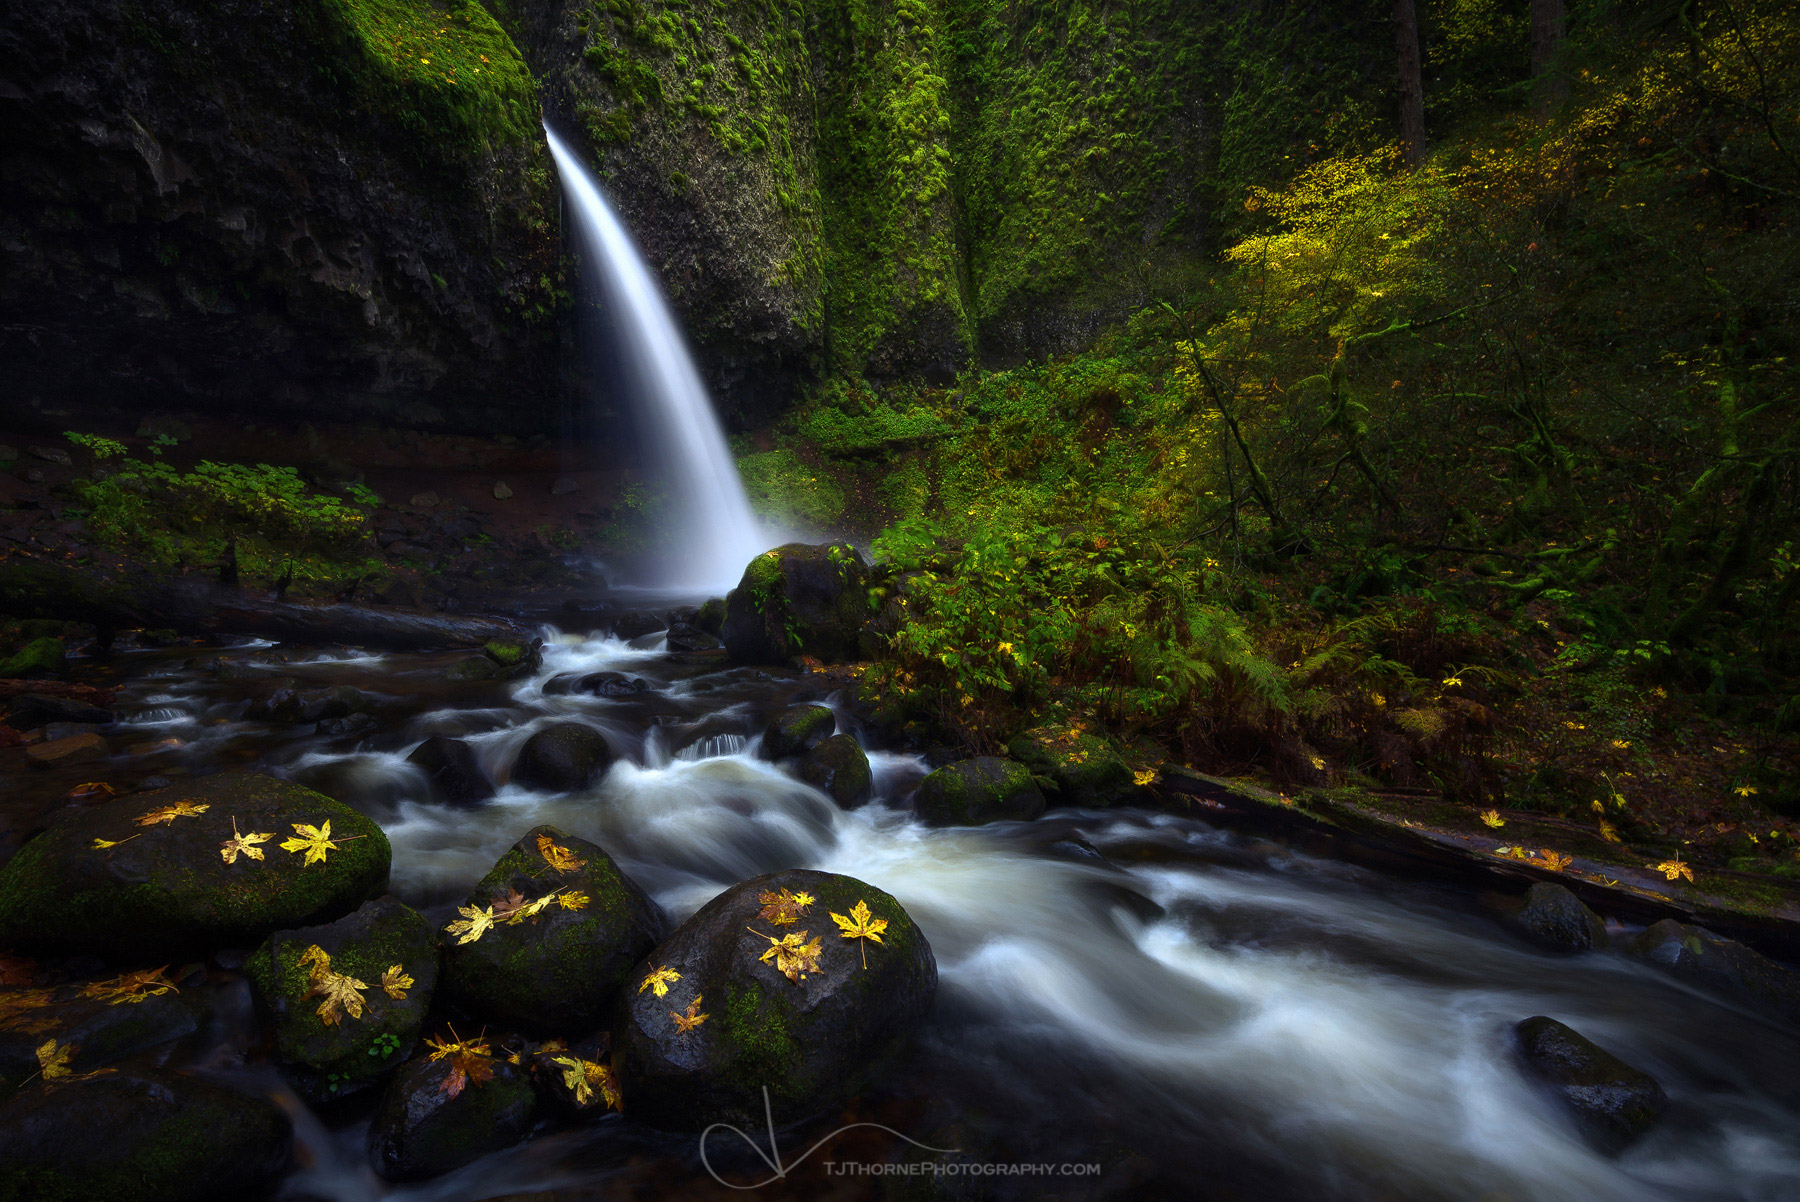 Autumn leaves dot the landscape at Ponytail Falls in the Columbia River Gorge, Oregon. Ponytail Falls is one of the more popular...